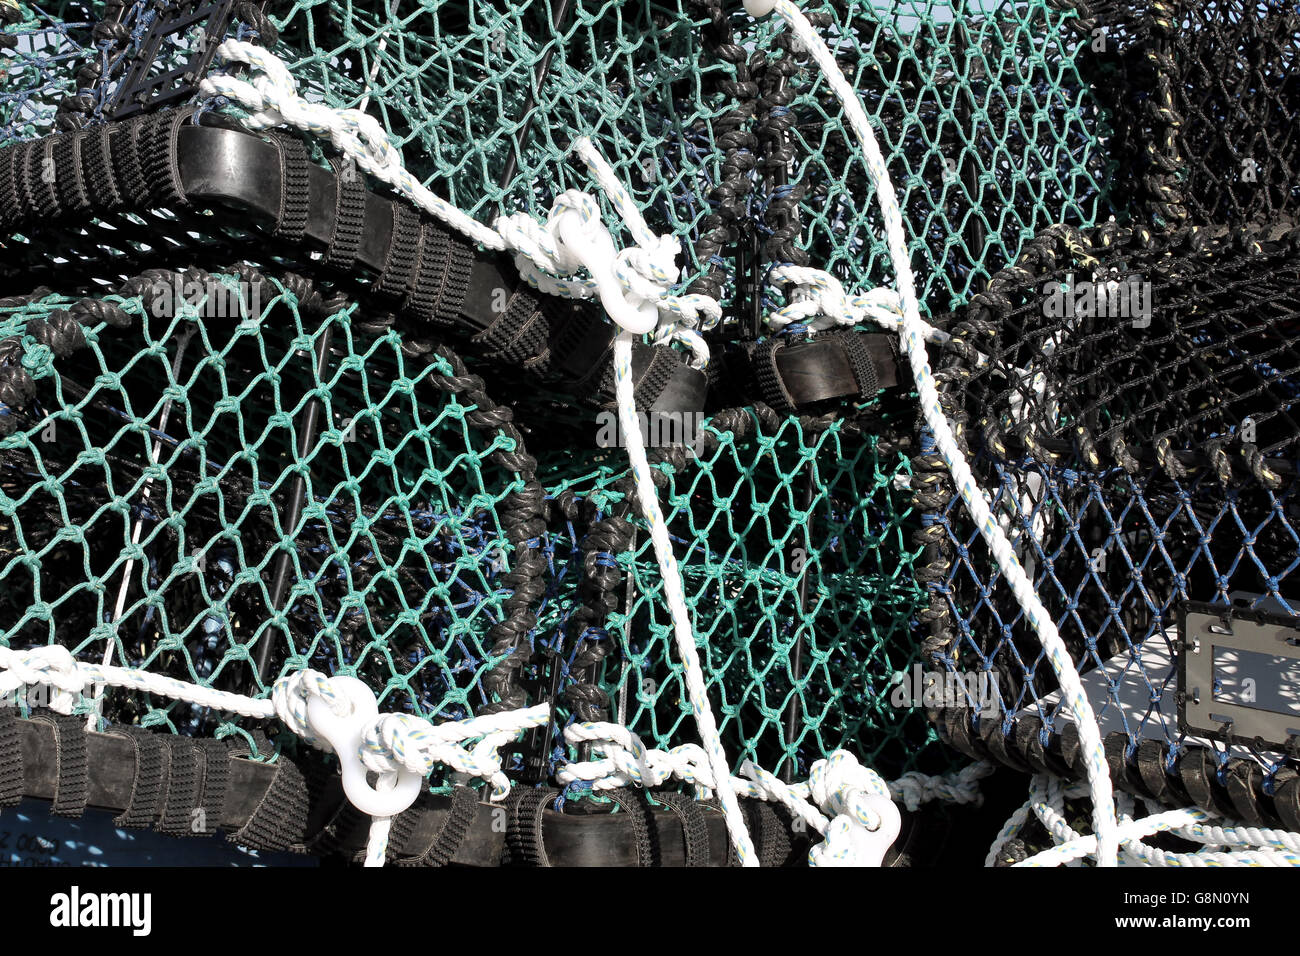 Stack of lobster pots, Scarborough, England. Stock Photo